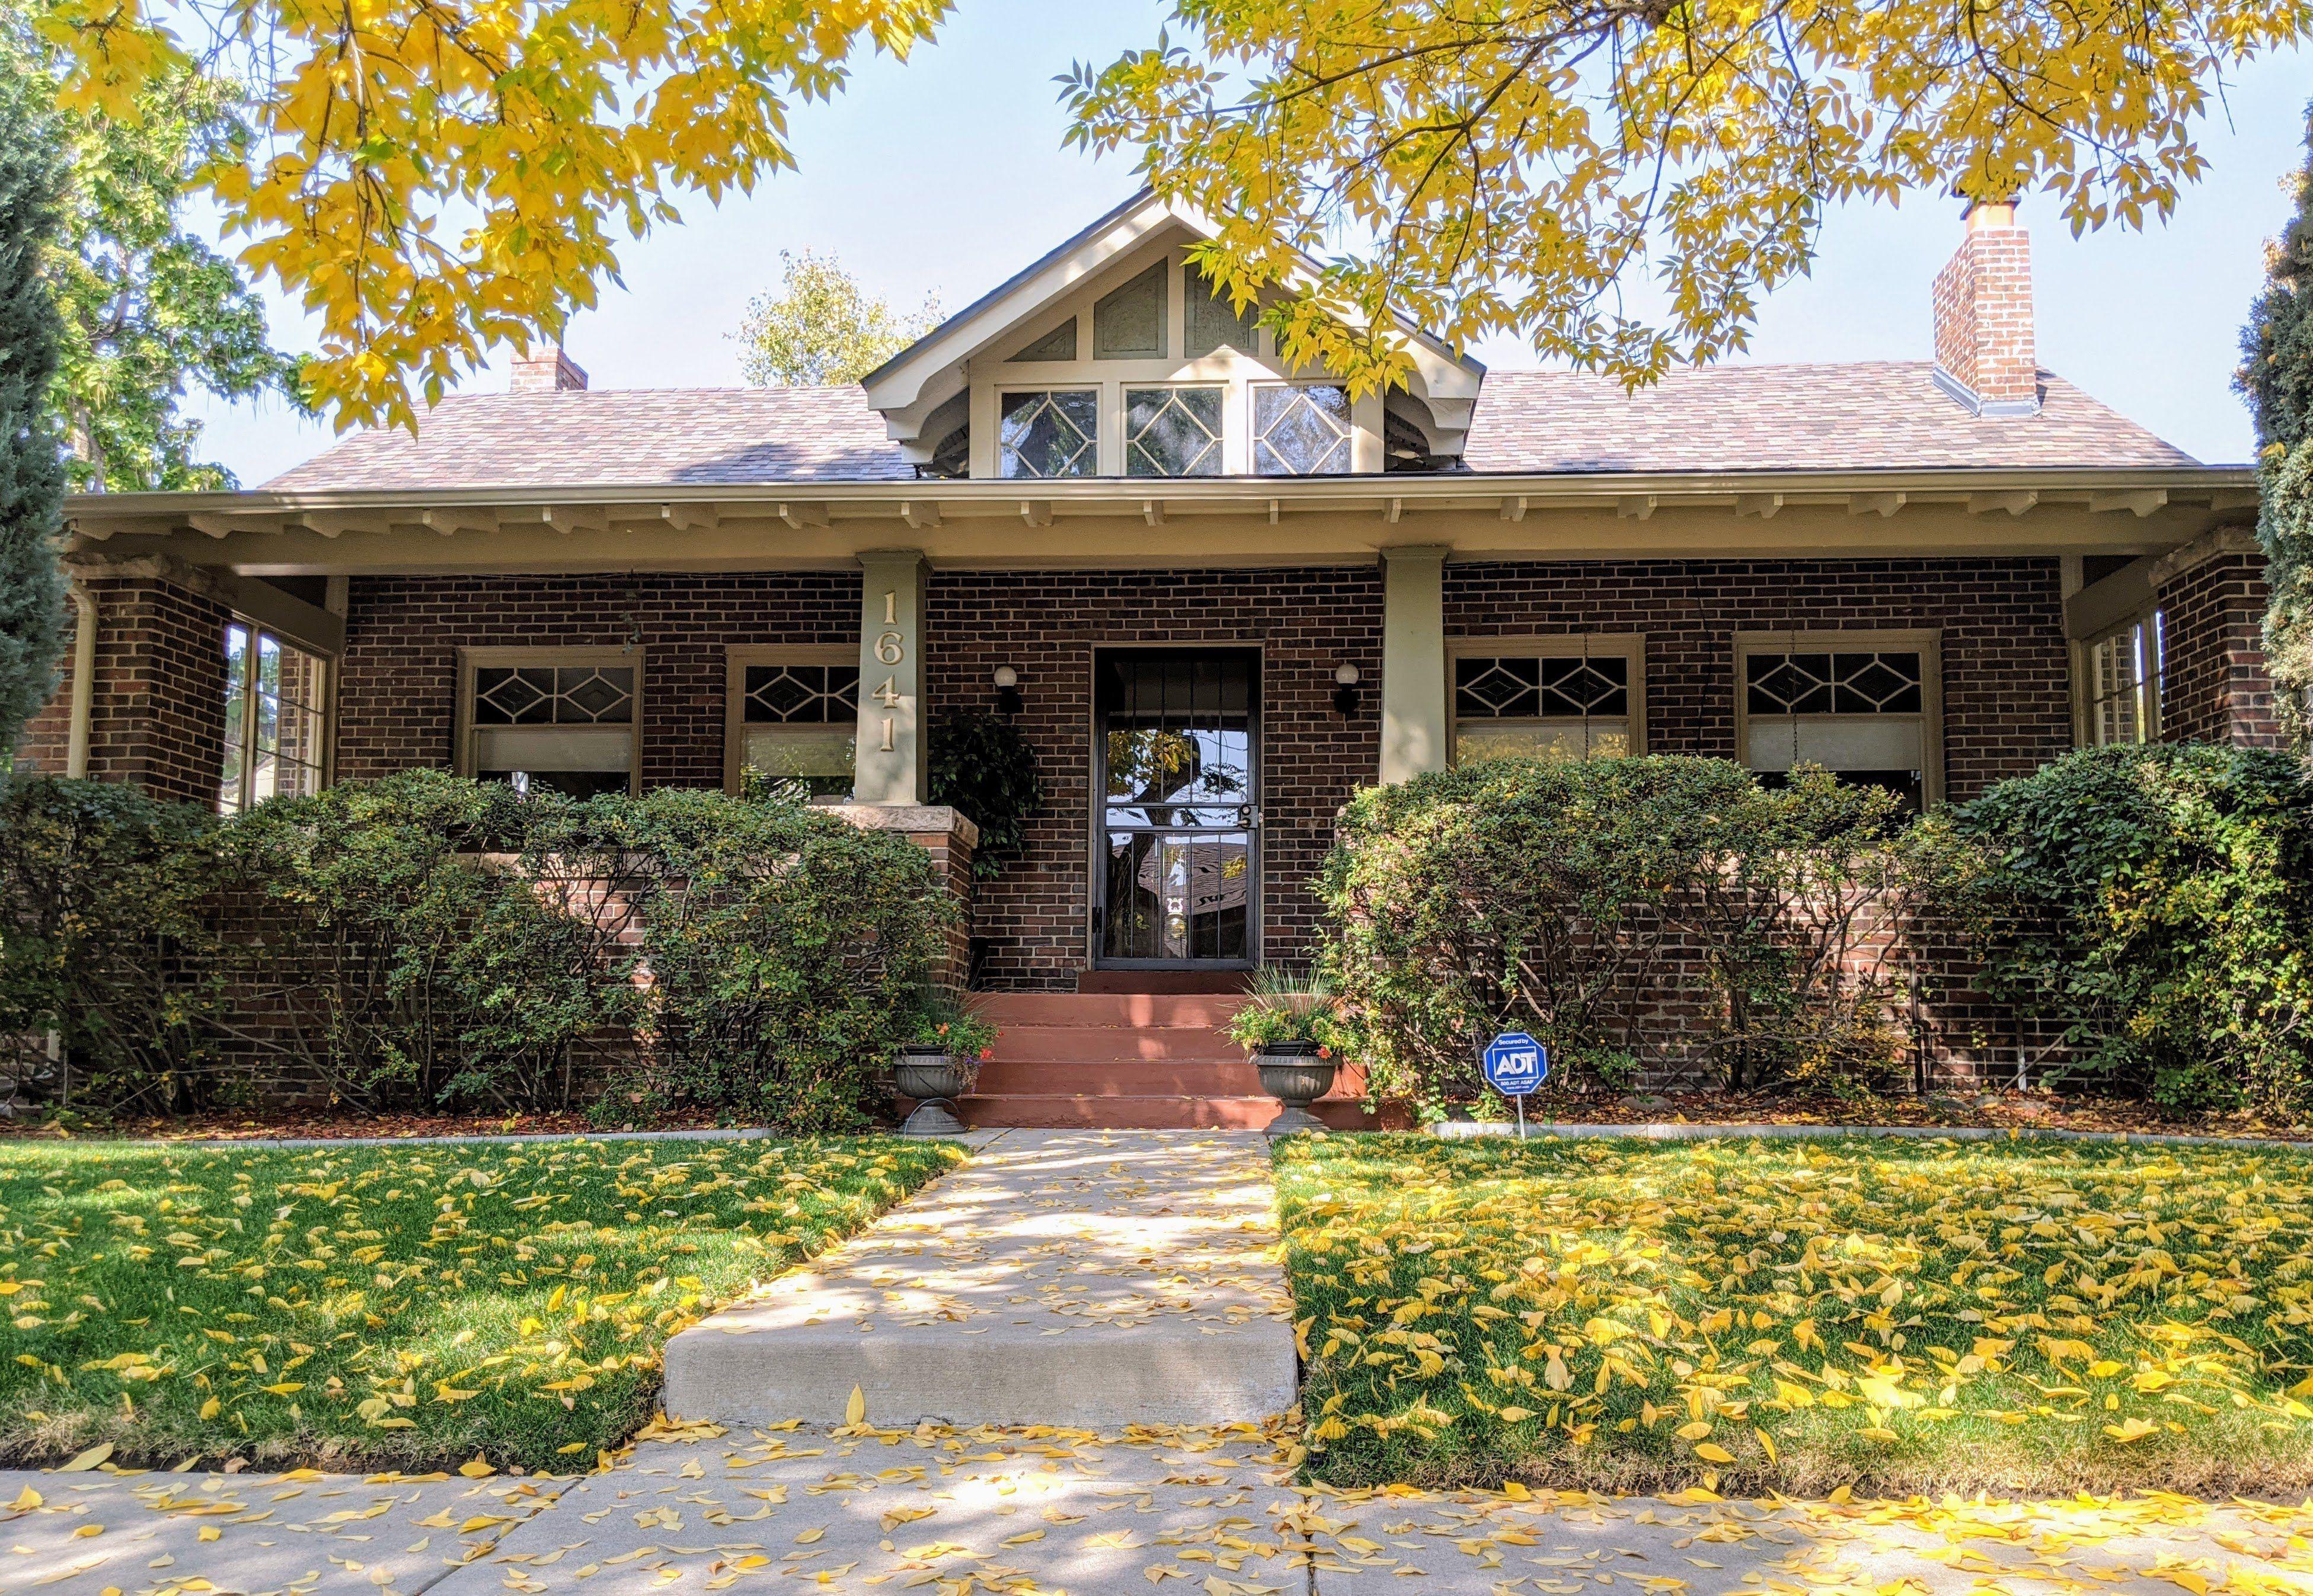 A Restored 1920s Arts & Crafts Bungalow